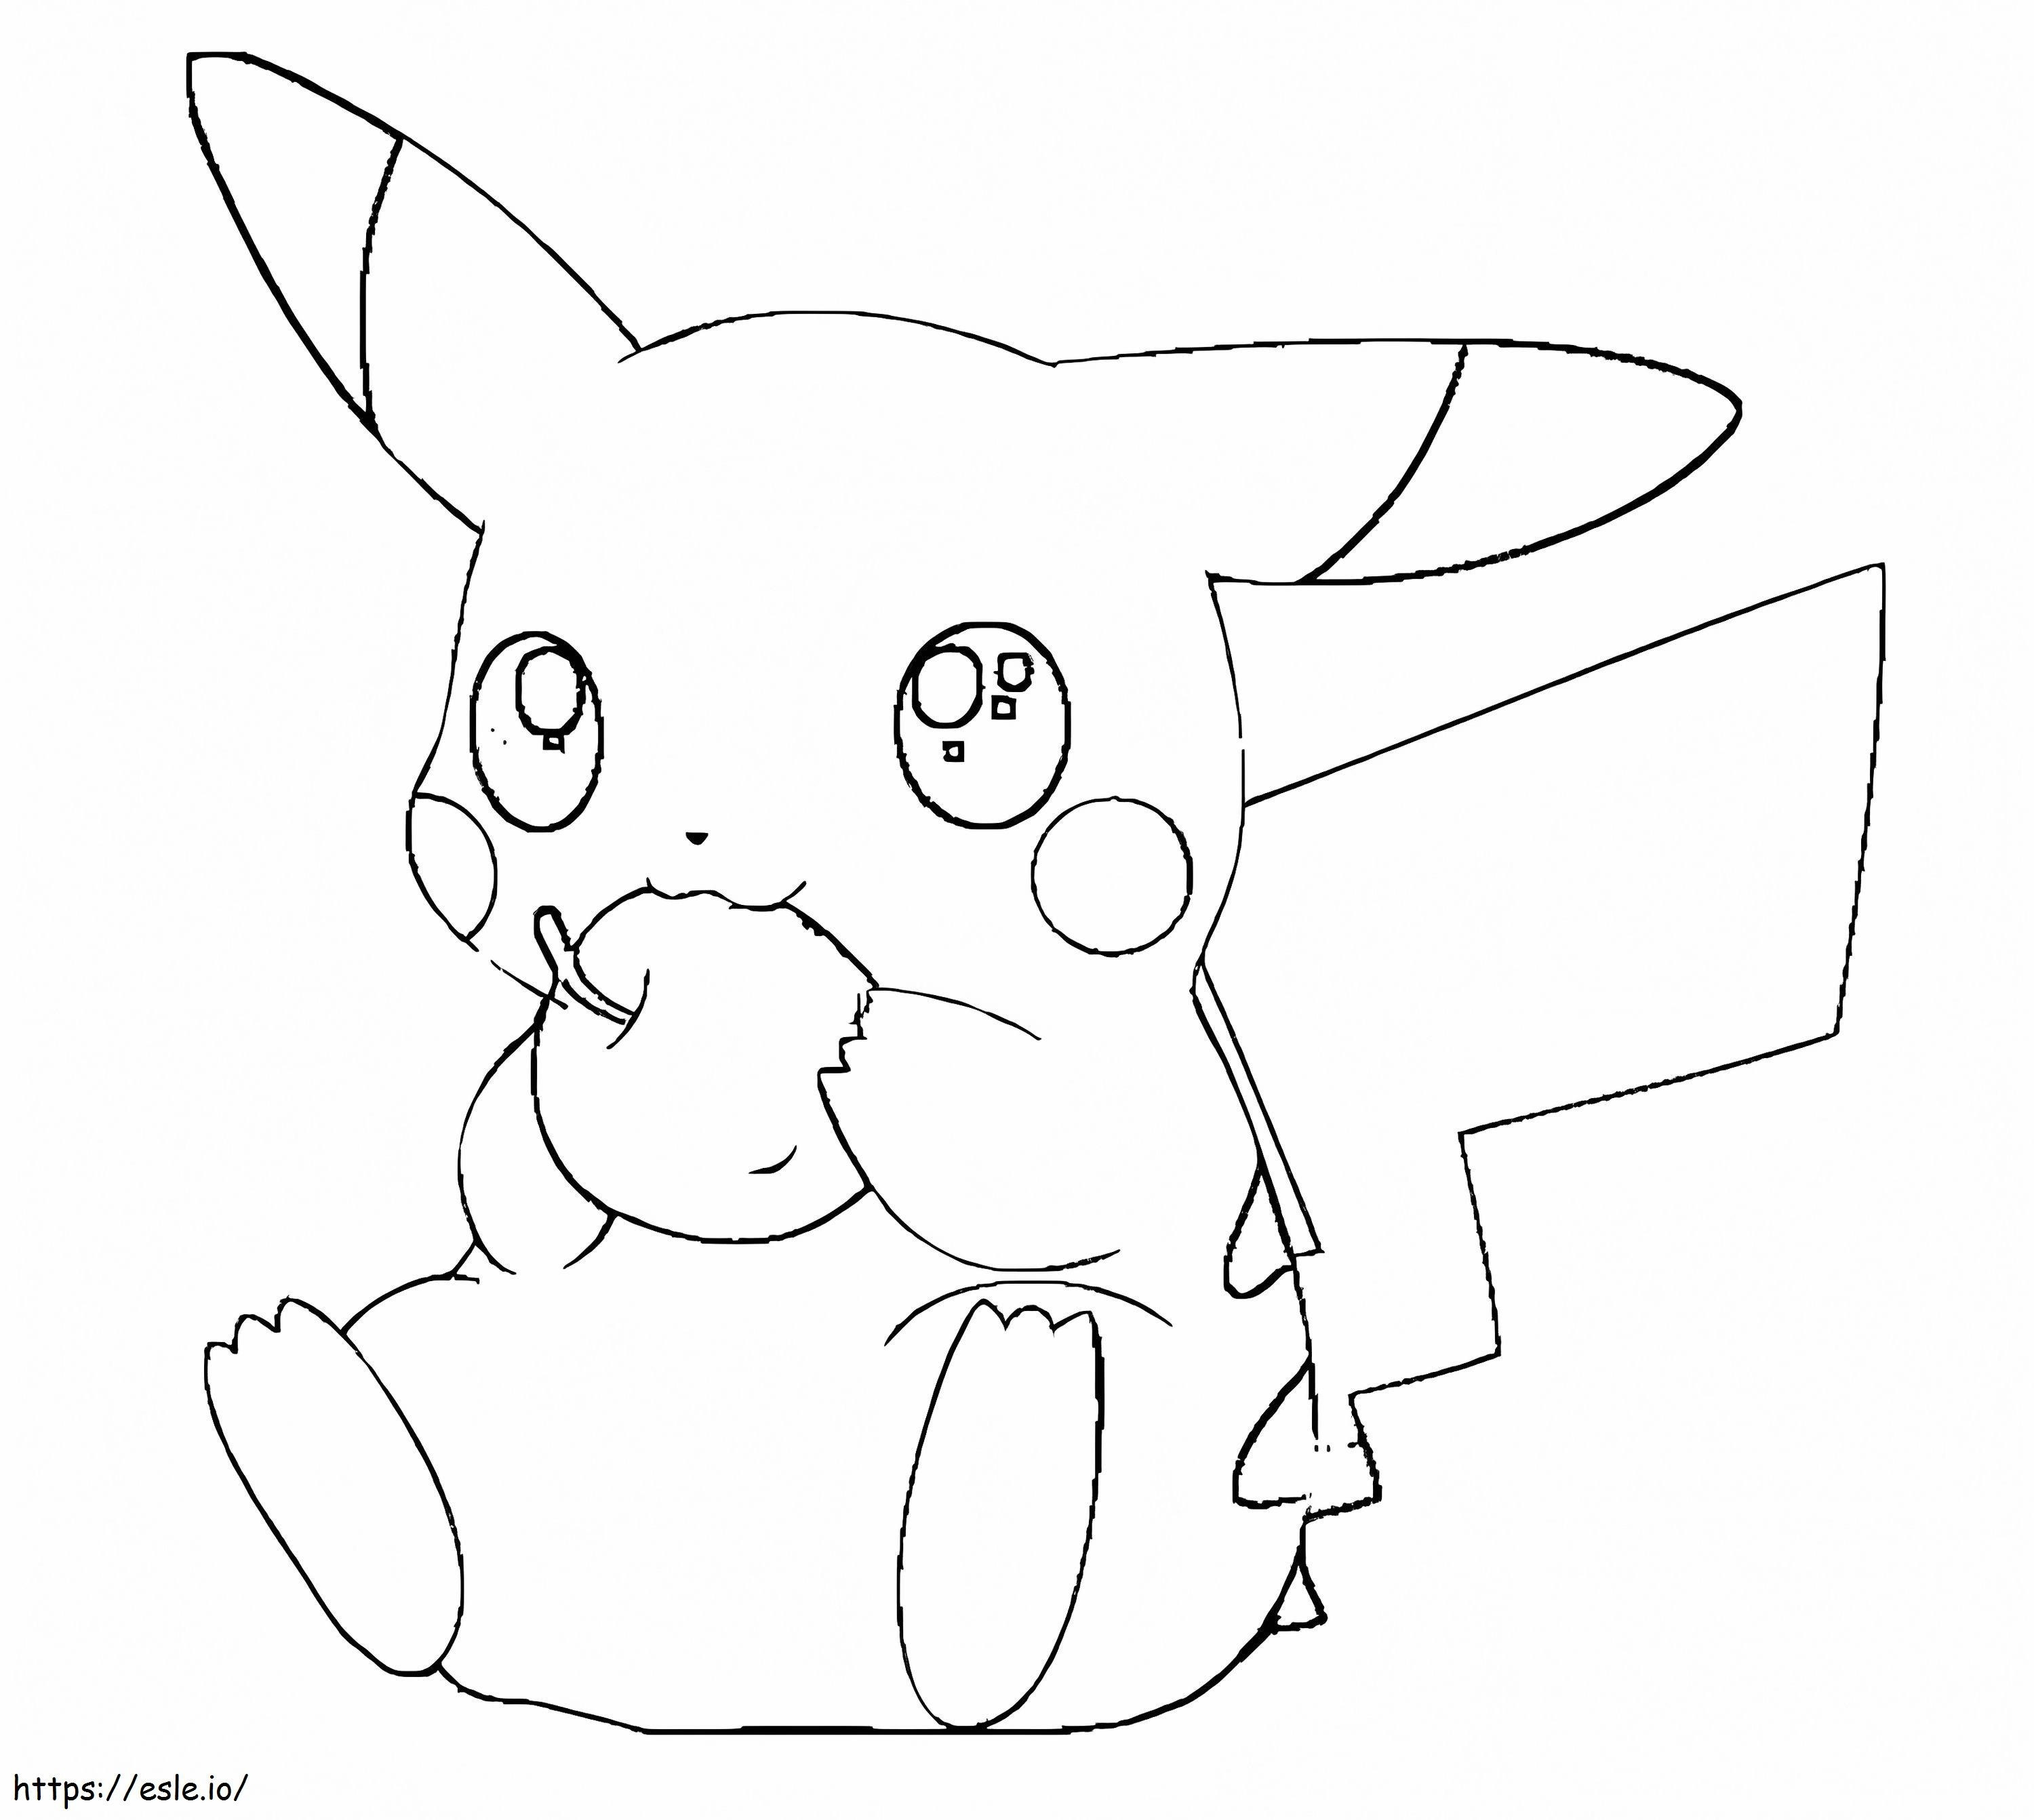 Pikachu Eating Apple coloring page